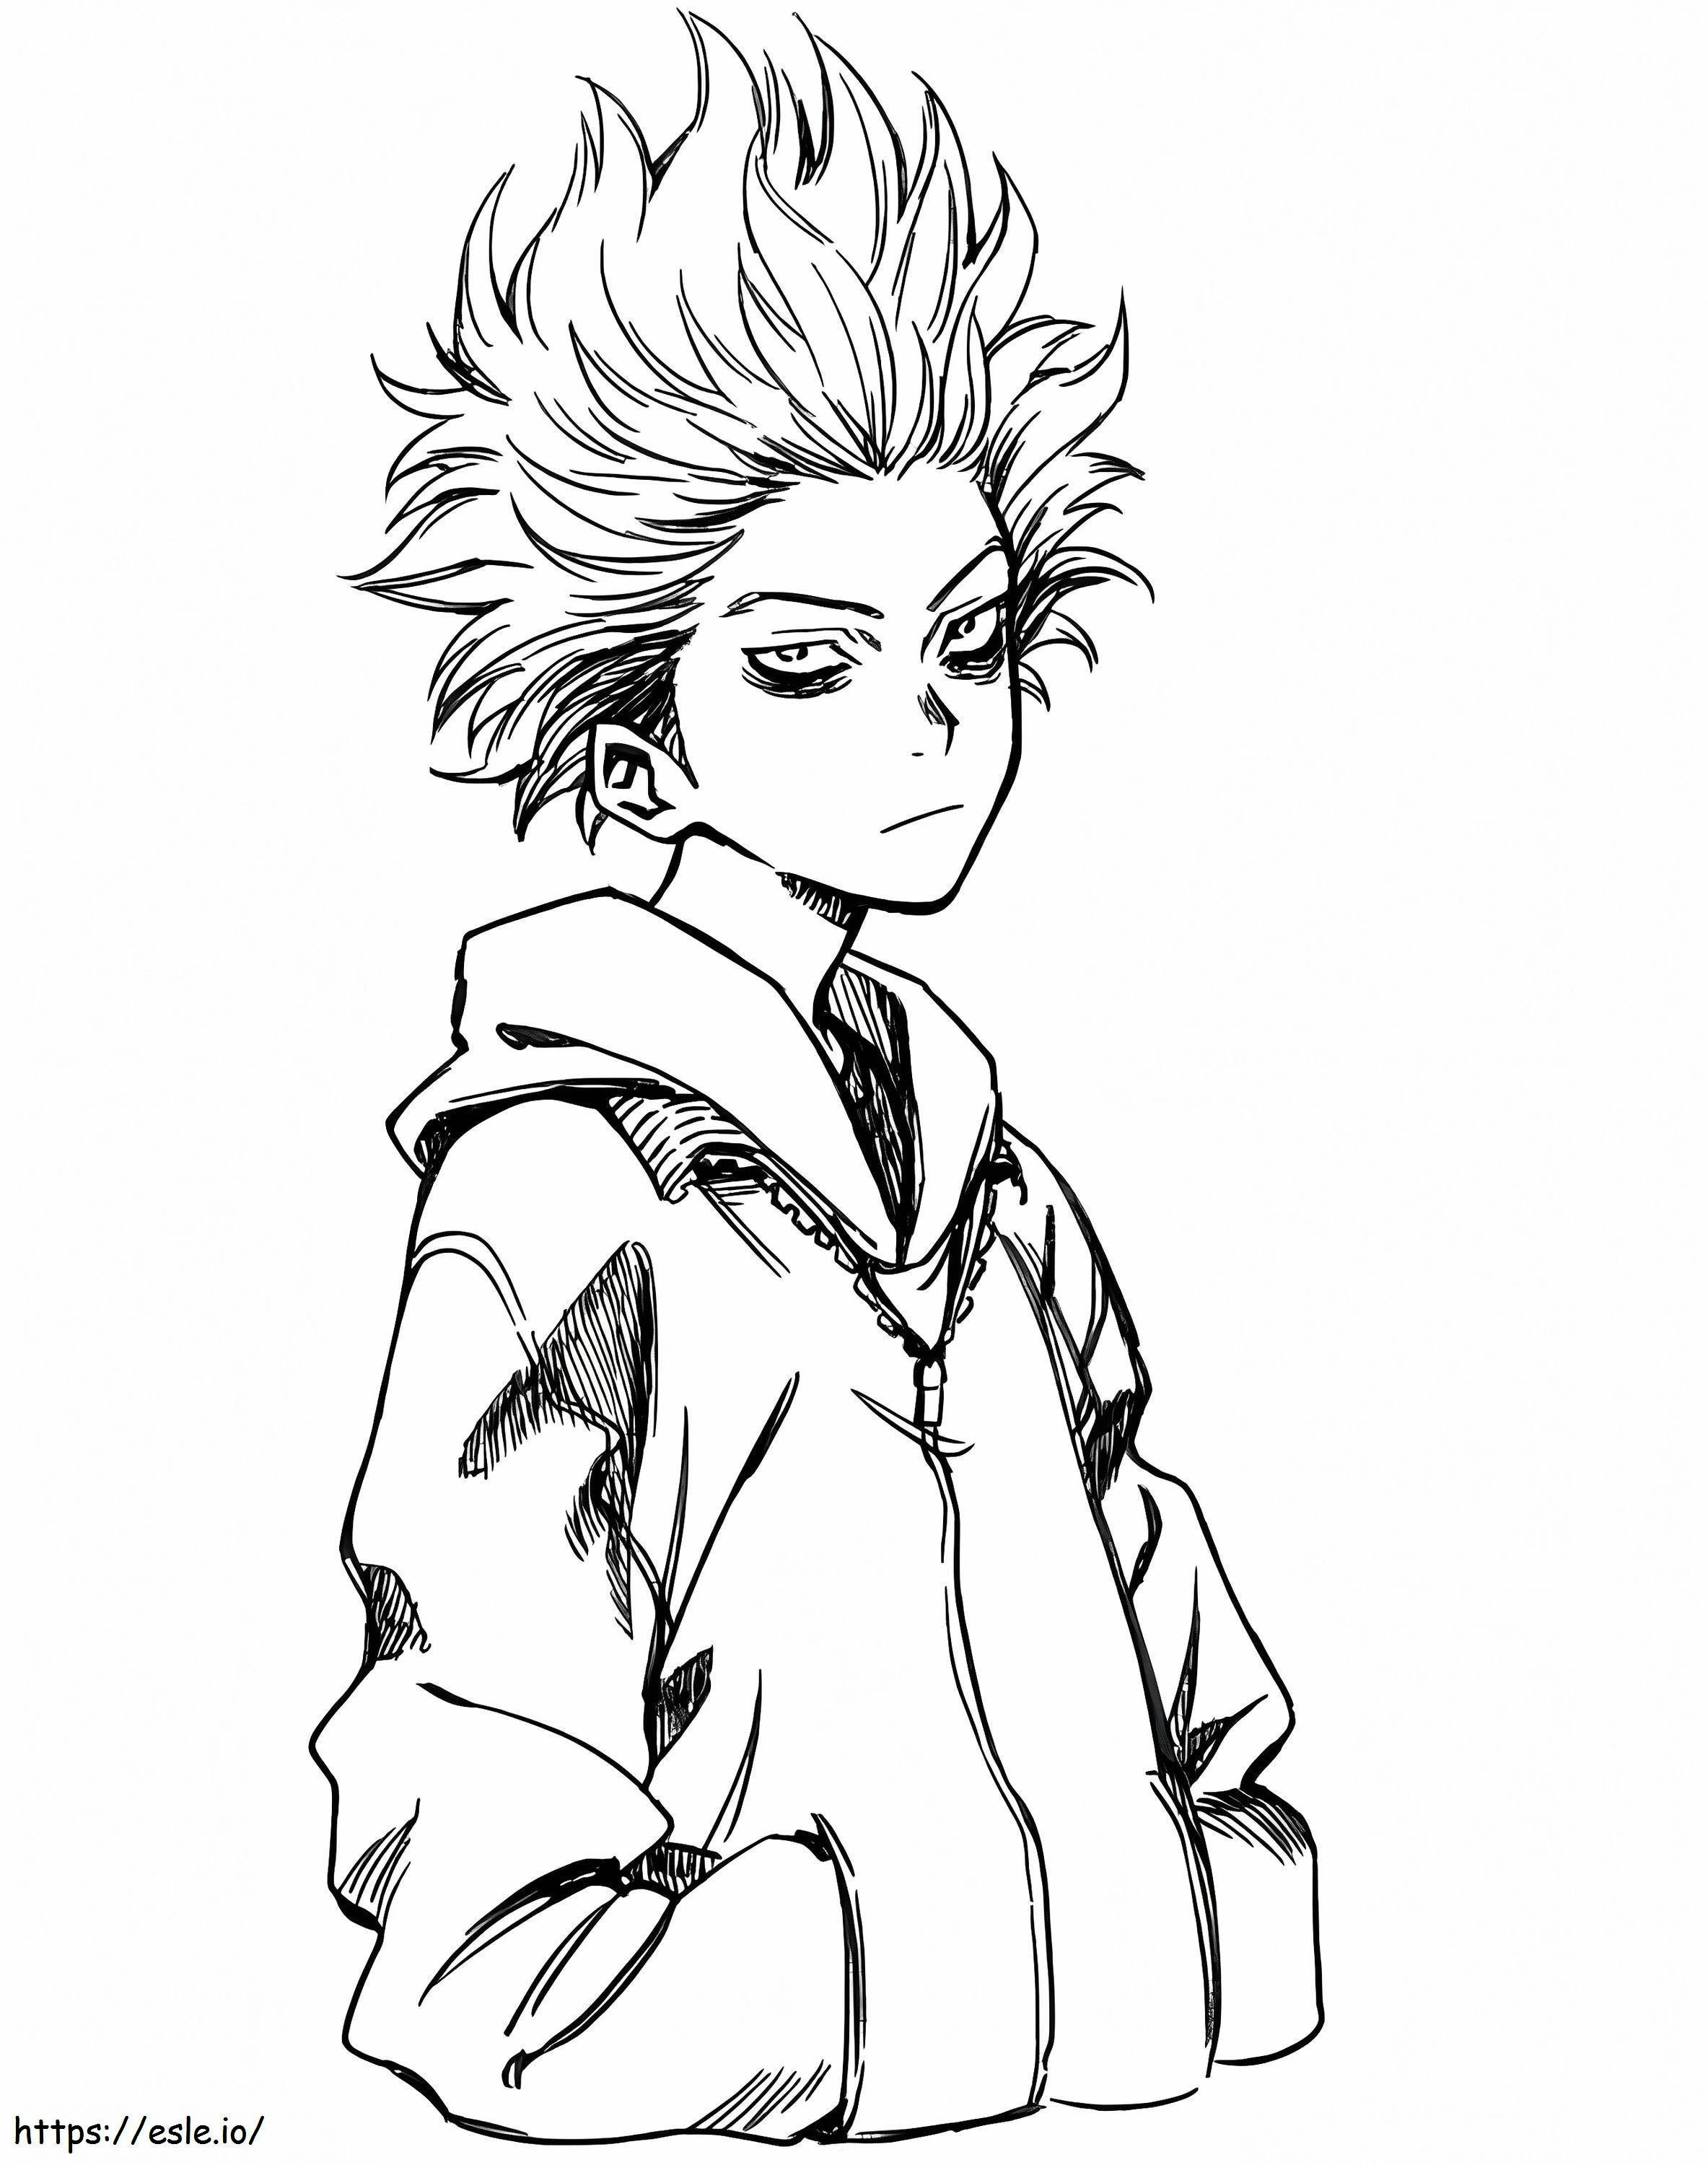 Handsome Hitoshi Shinso coloring page